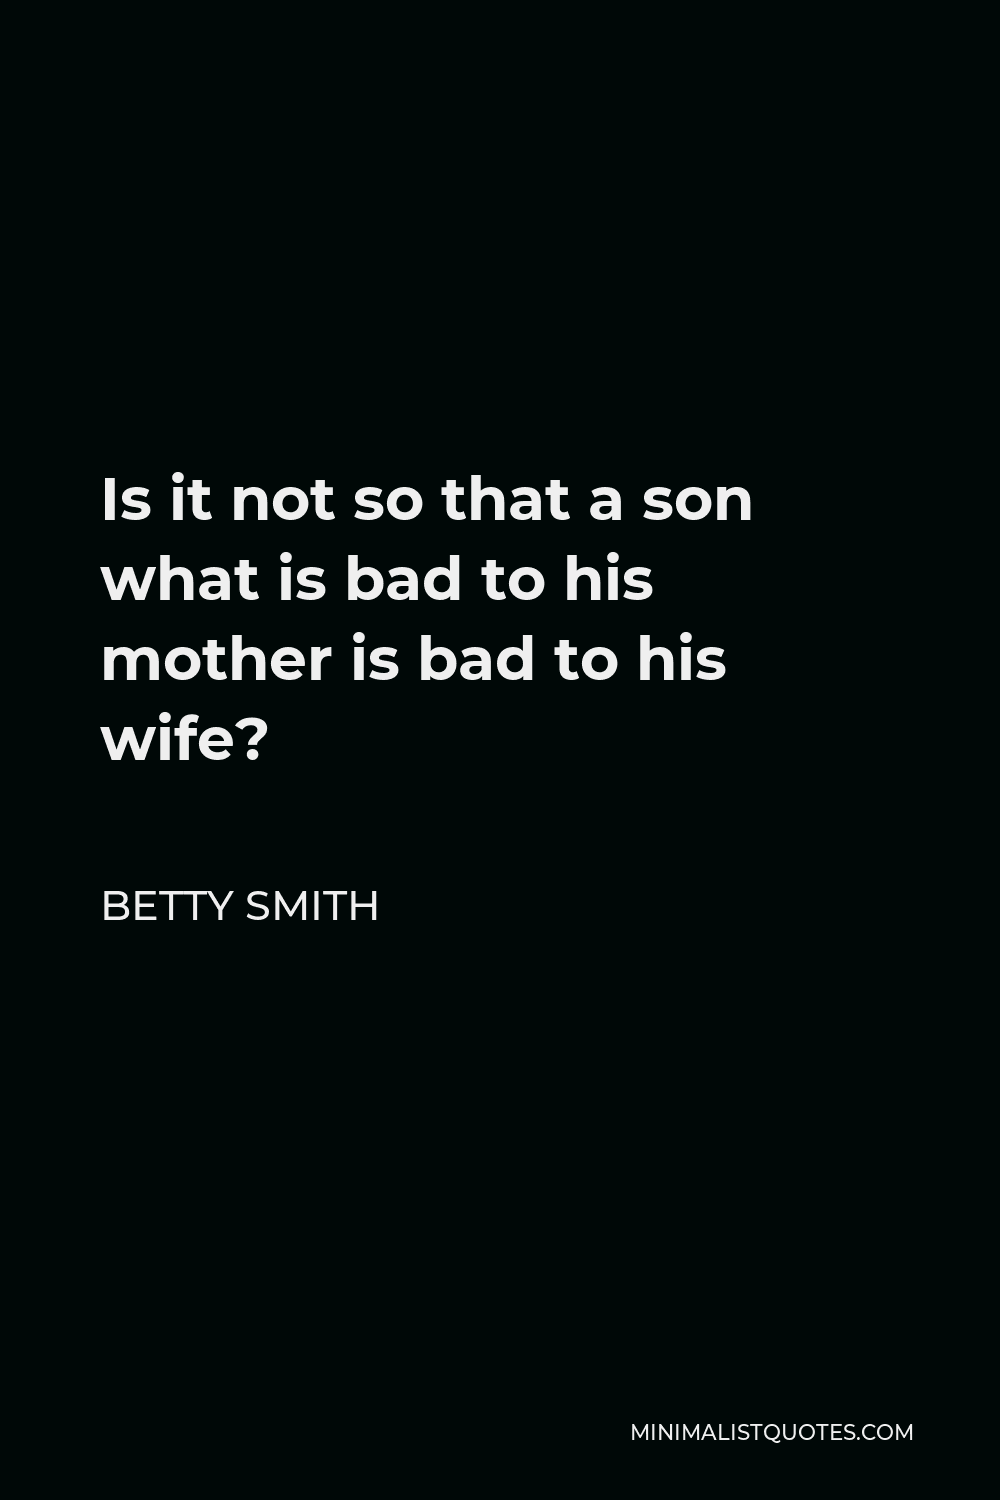 Betty Smith Quote - Is it not so that a son what is bad to his mother is bad to his wife?